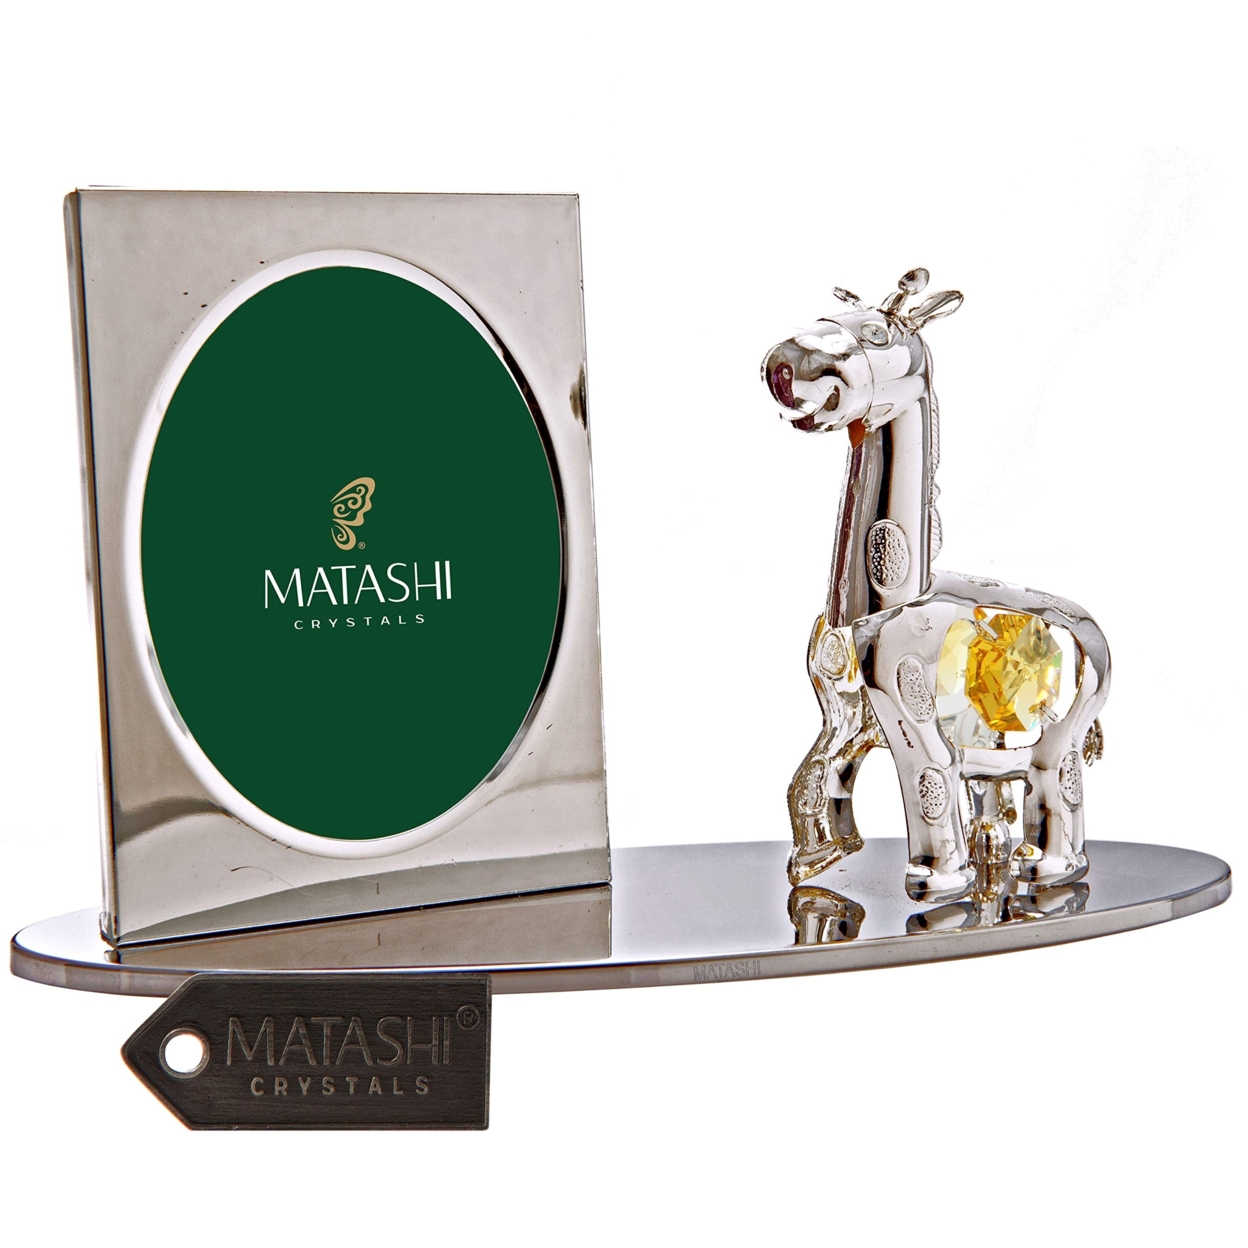 Matashi Silver Plated Picture Frame With Crystal Studded Cartoon Giraffe Figurine On A Base Gift For Christmas Mother's Day Birthday